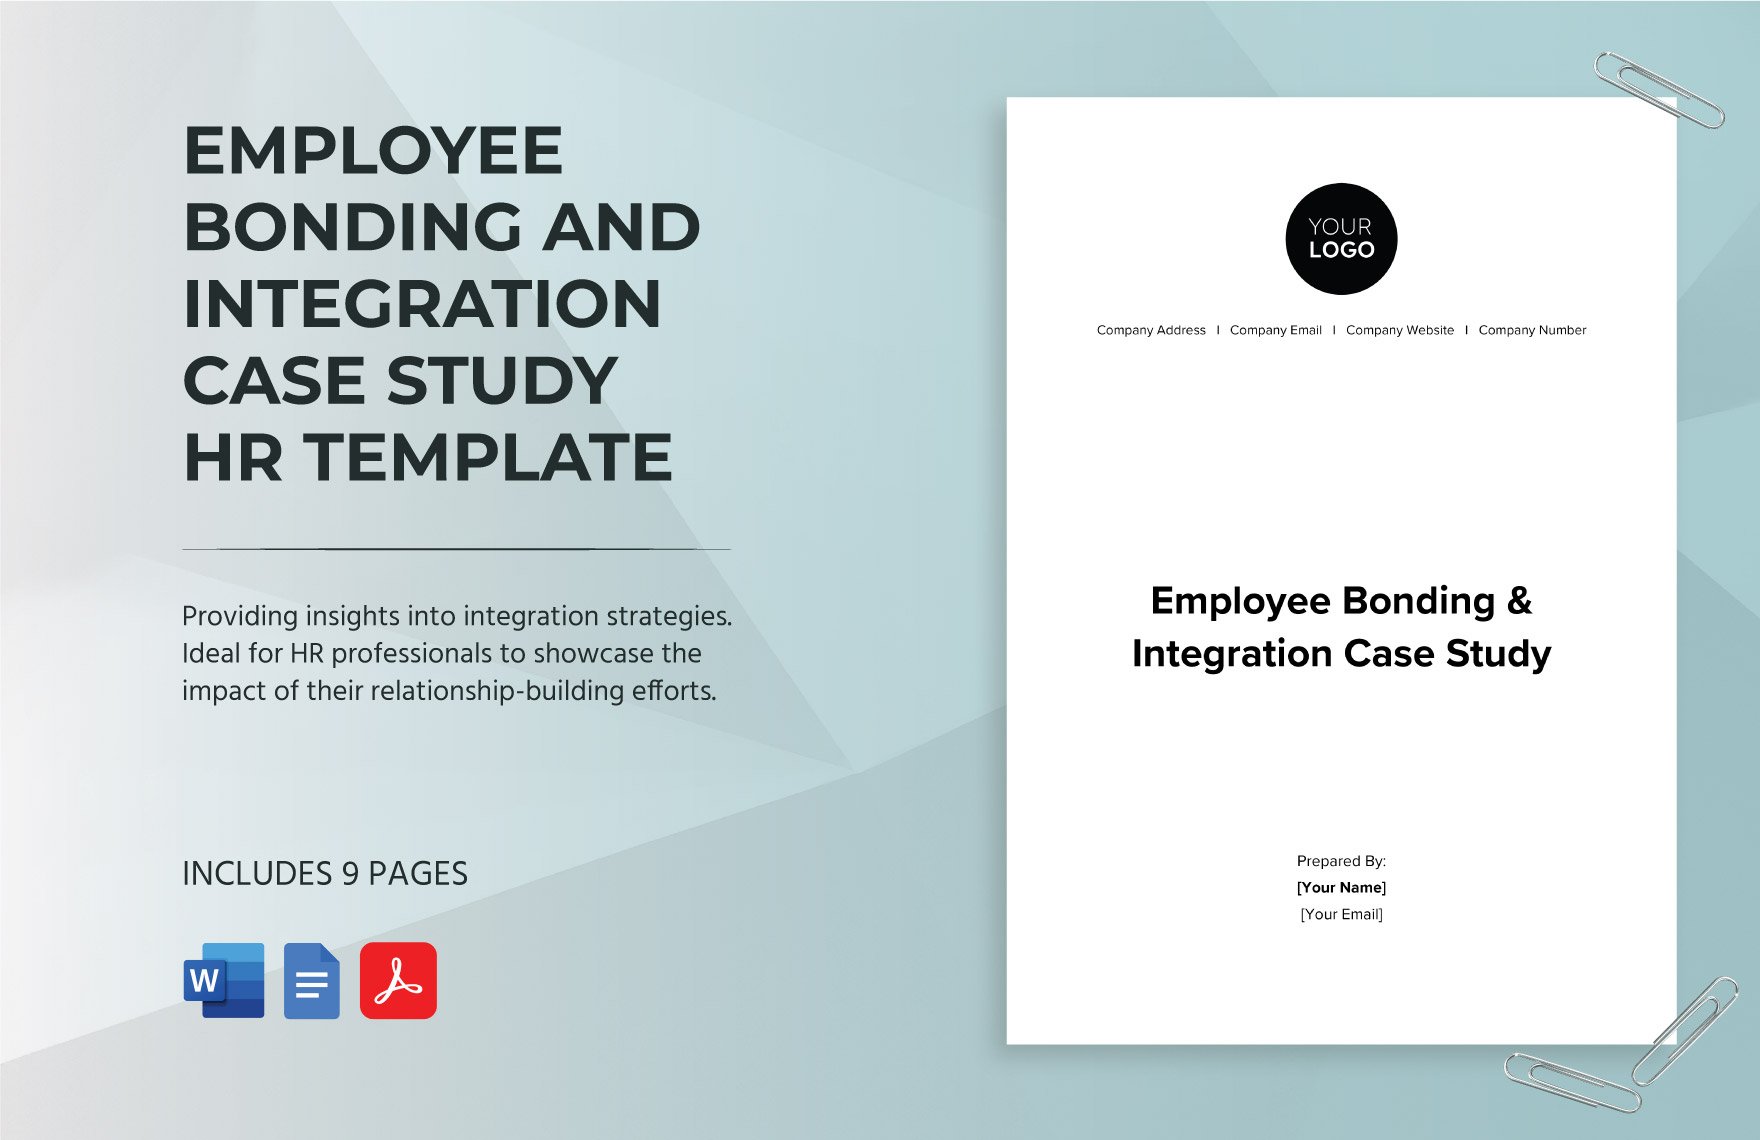 Employee Bonding and Integration Case Study HR Template